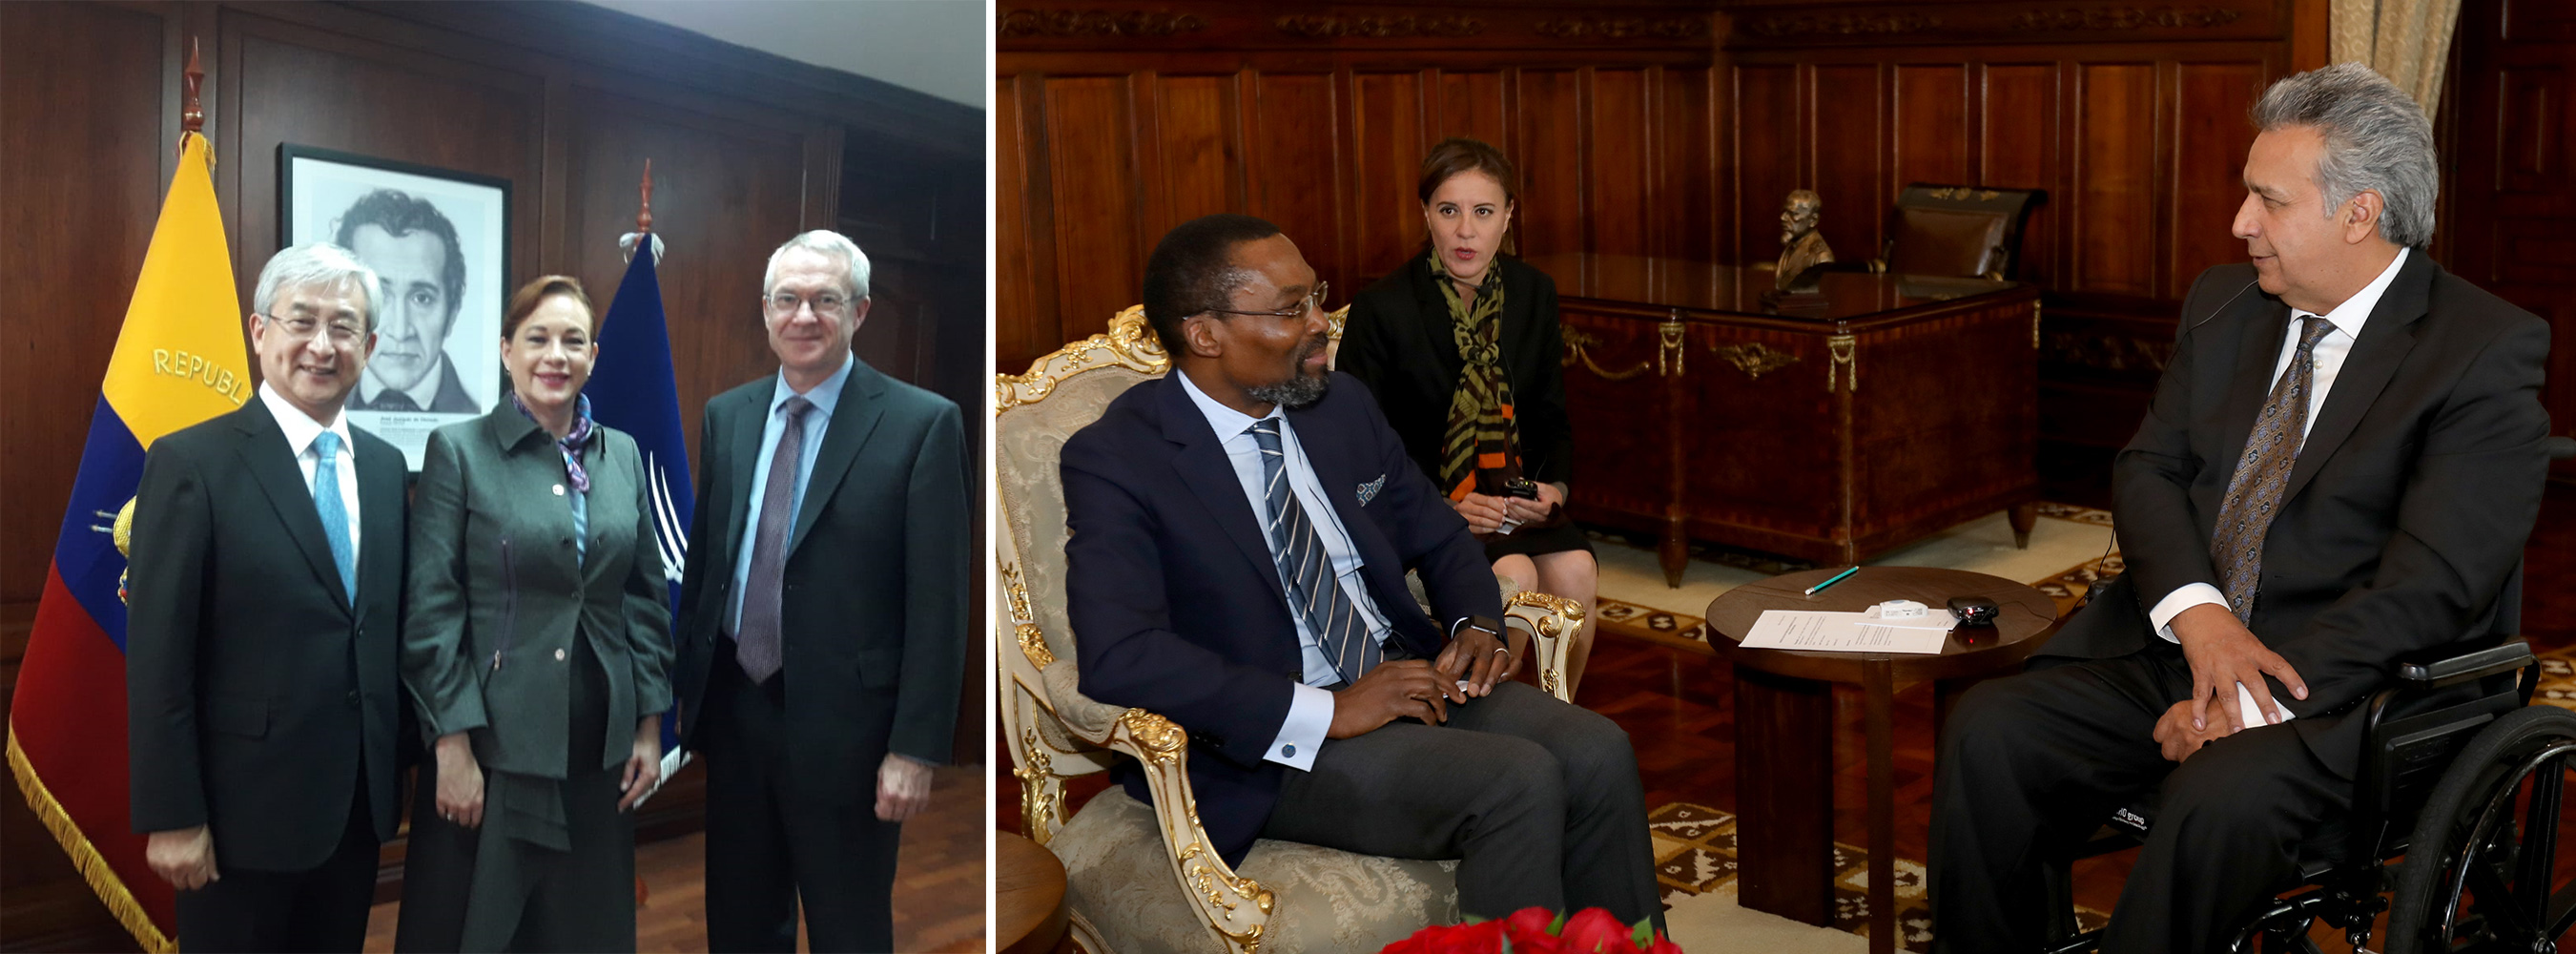 Left&#58; ASP President H.E. O-Gon Kwon and ICC Registrar Peter Lewis meet with H.E. María Fernanda Espinosa, former Minister of External Relations and Human Mobility of Ecuador, and President-elect of the 73rd session of the UN General Assembly; Right&#58; Ecuador President H.E. Lenín Moreno receives ICC President Judge Chile Eboe-Osuji